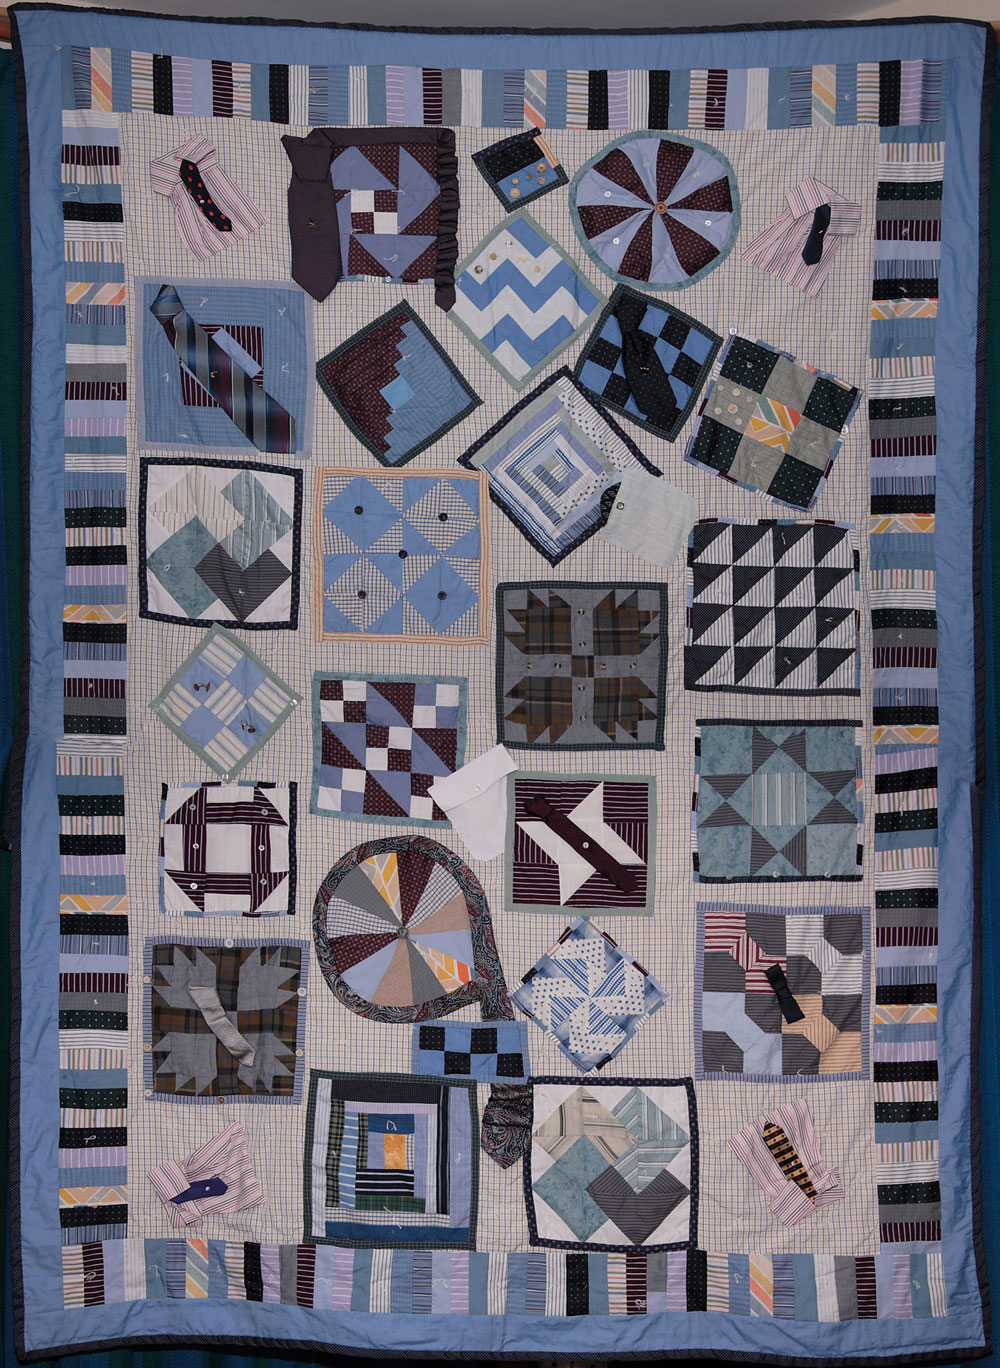 'Sew and Sew's quilt', by Casrlerock Quilting Group. (Photo: Martin Melaugh)